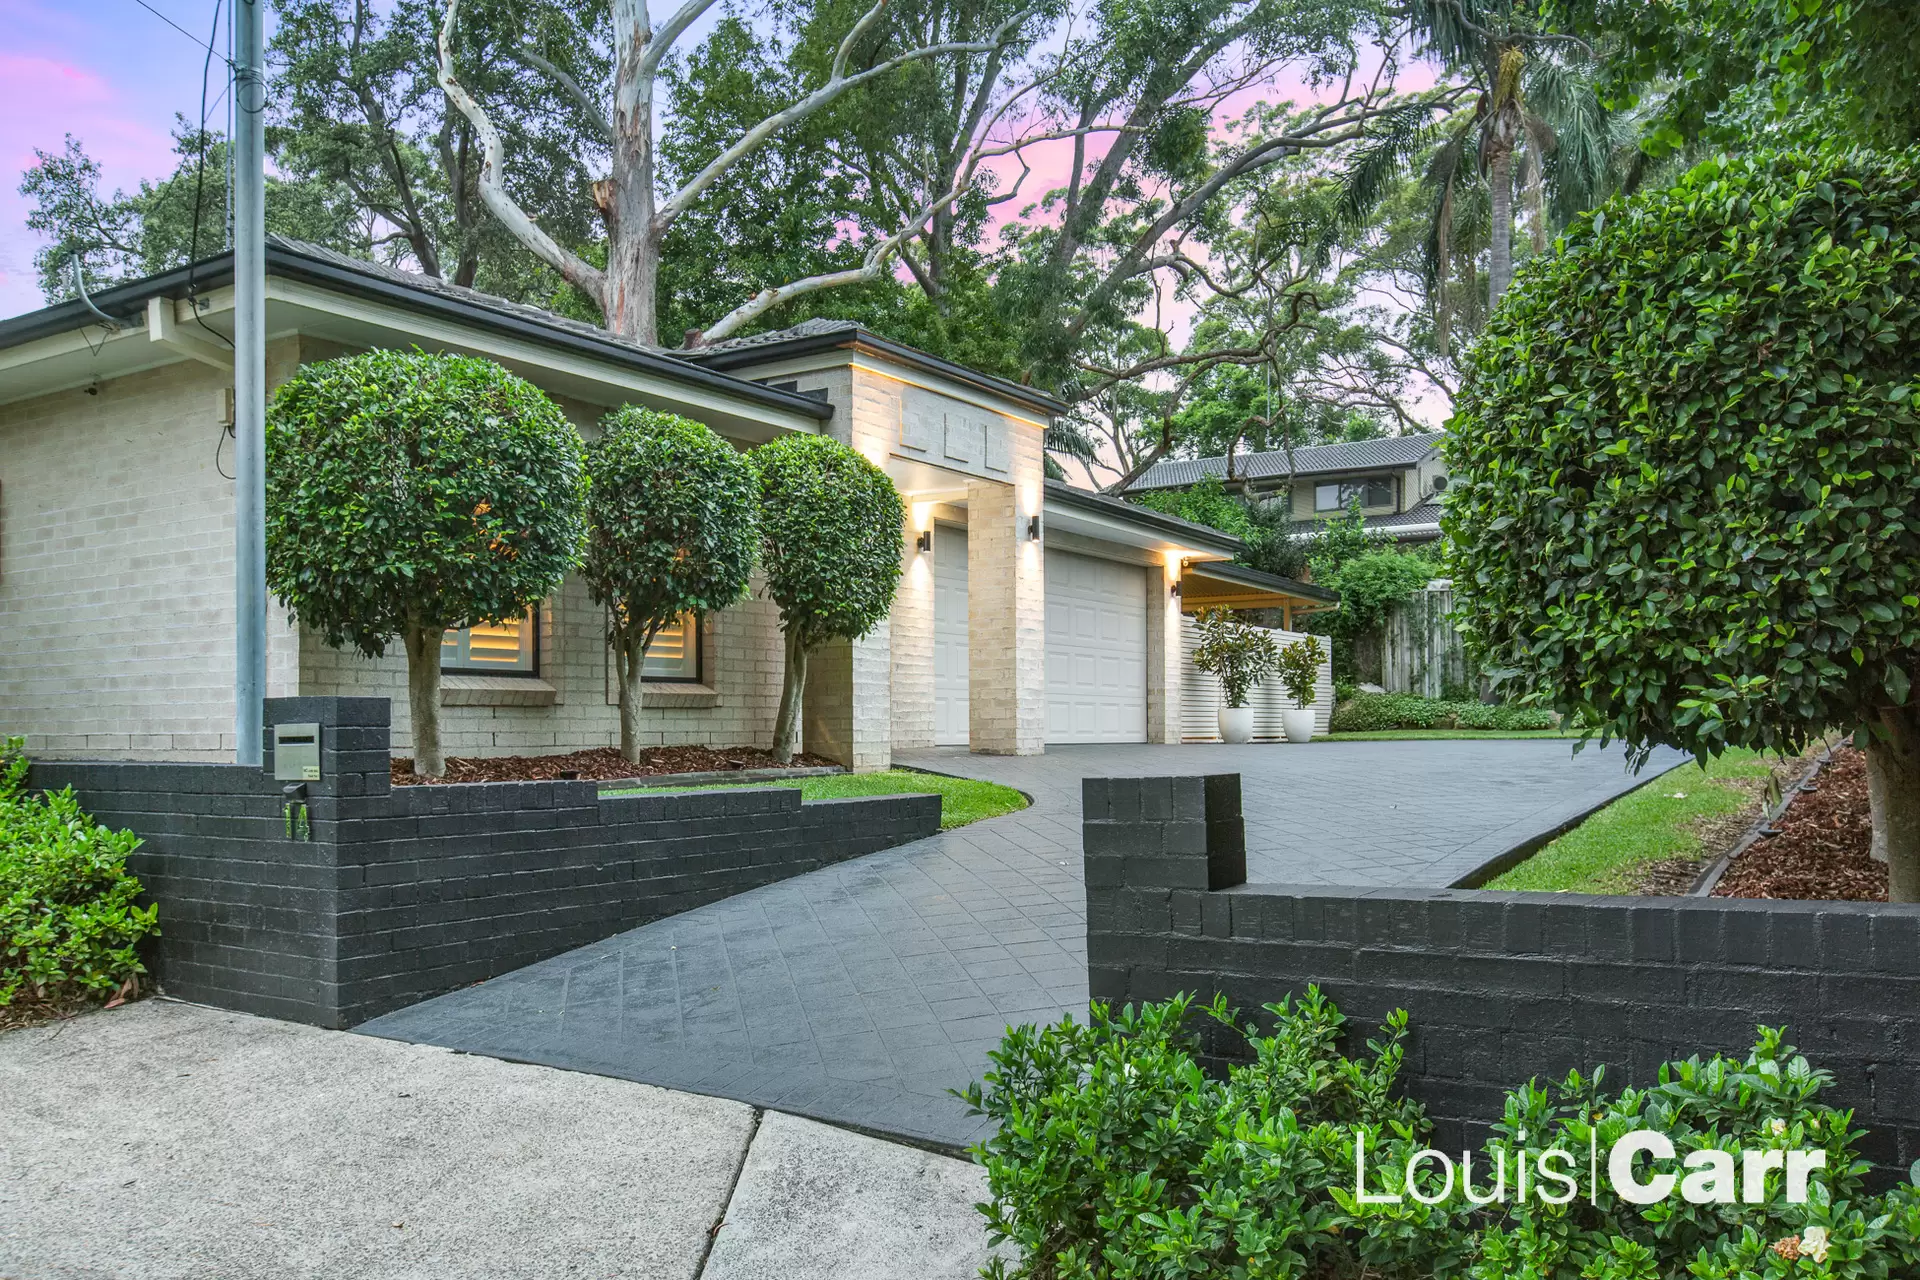 Photo #2: 14 Lee Road, West Pennant Hills - For Sale by Louis Carr Real Estate